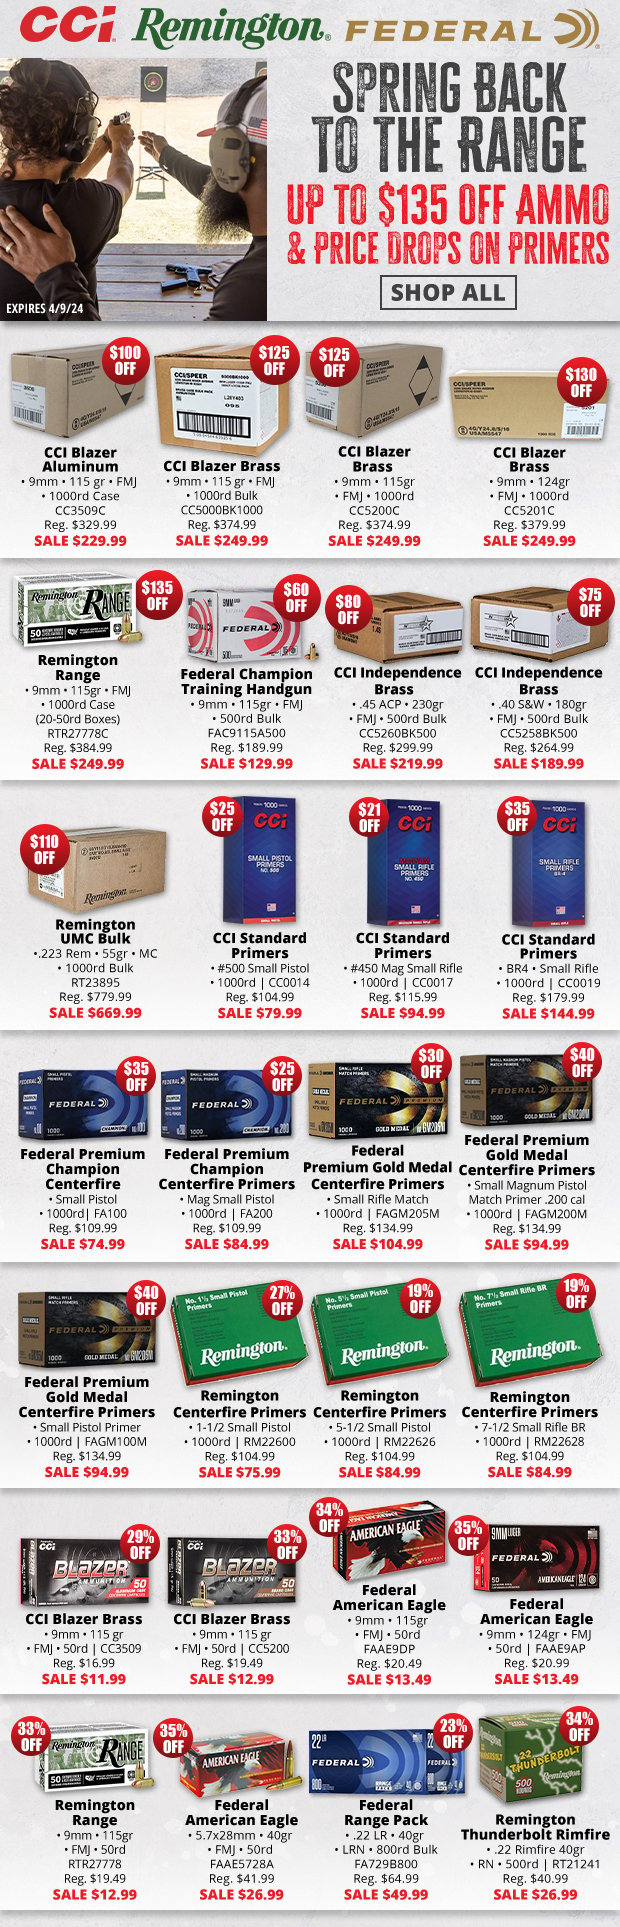 Up to $135 Off Ammo & Price Drops on Primers!